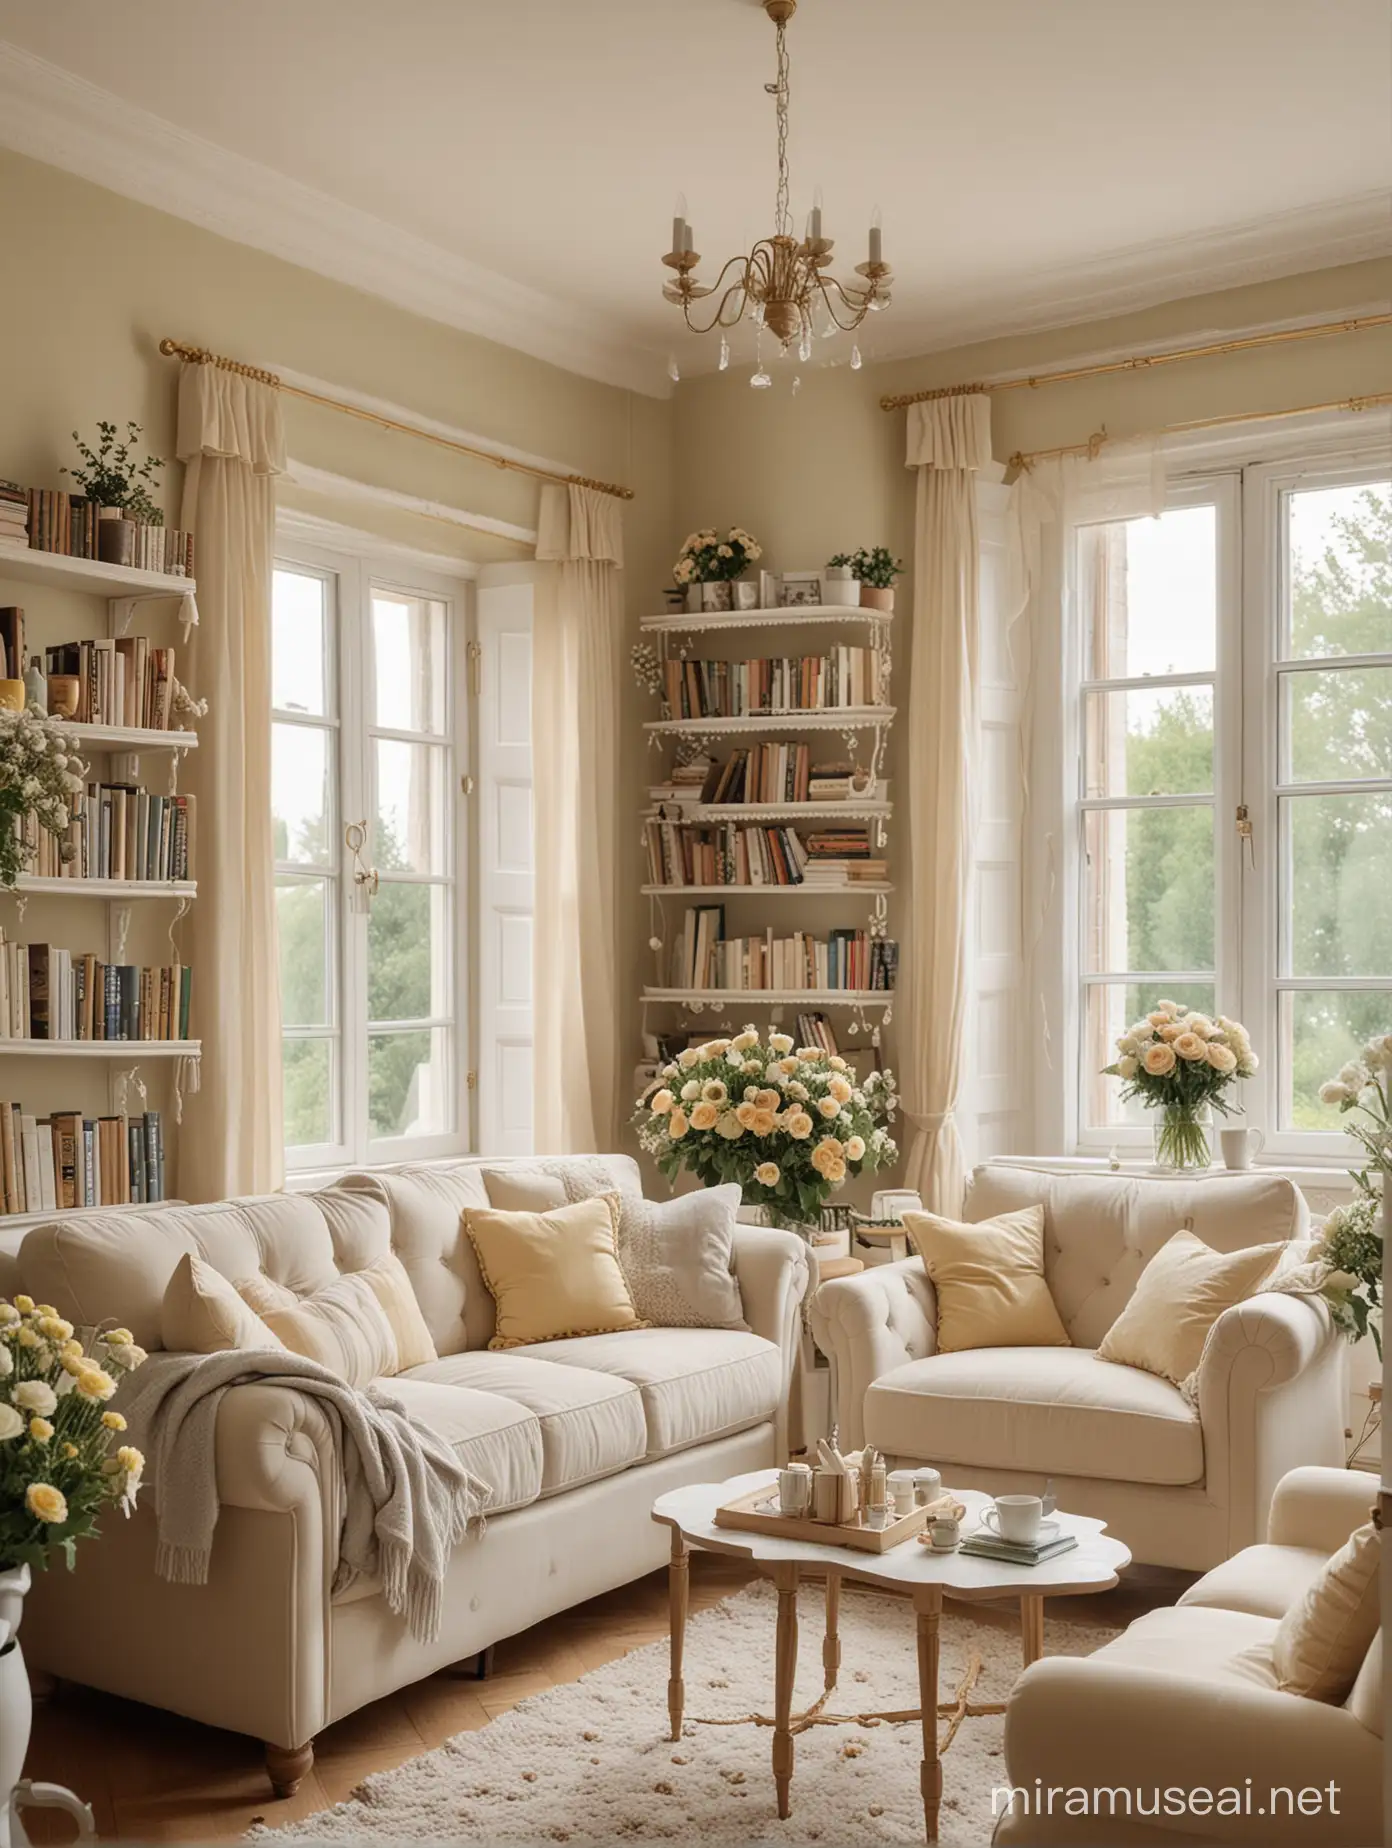 Cozy Home Interior with Green and Cream Sofas Pastel Roses and Peaceful Atmosphere